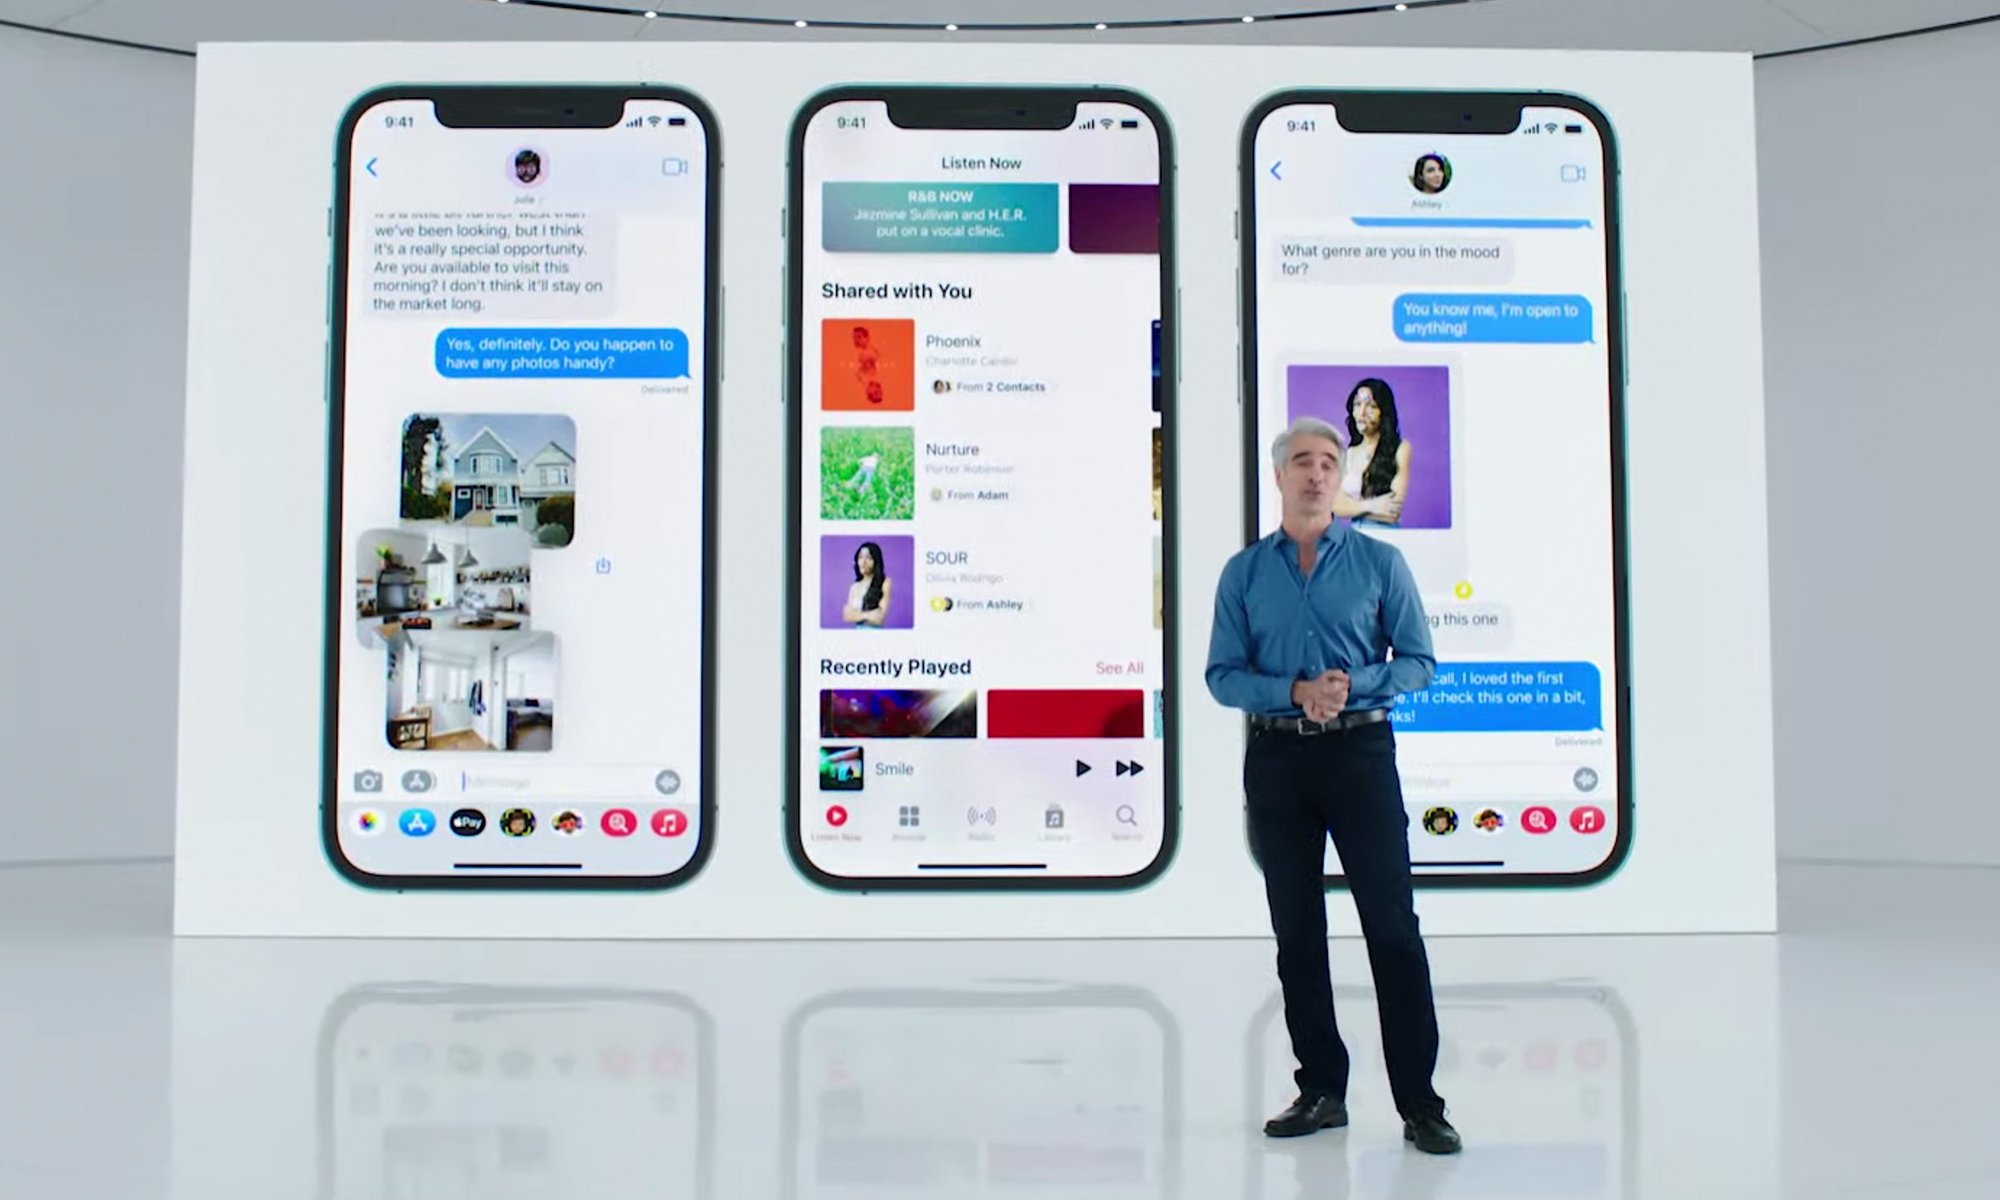 Apple Messages is getting a host of new sharing features